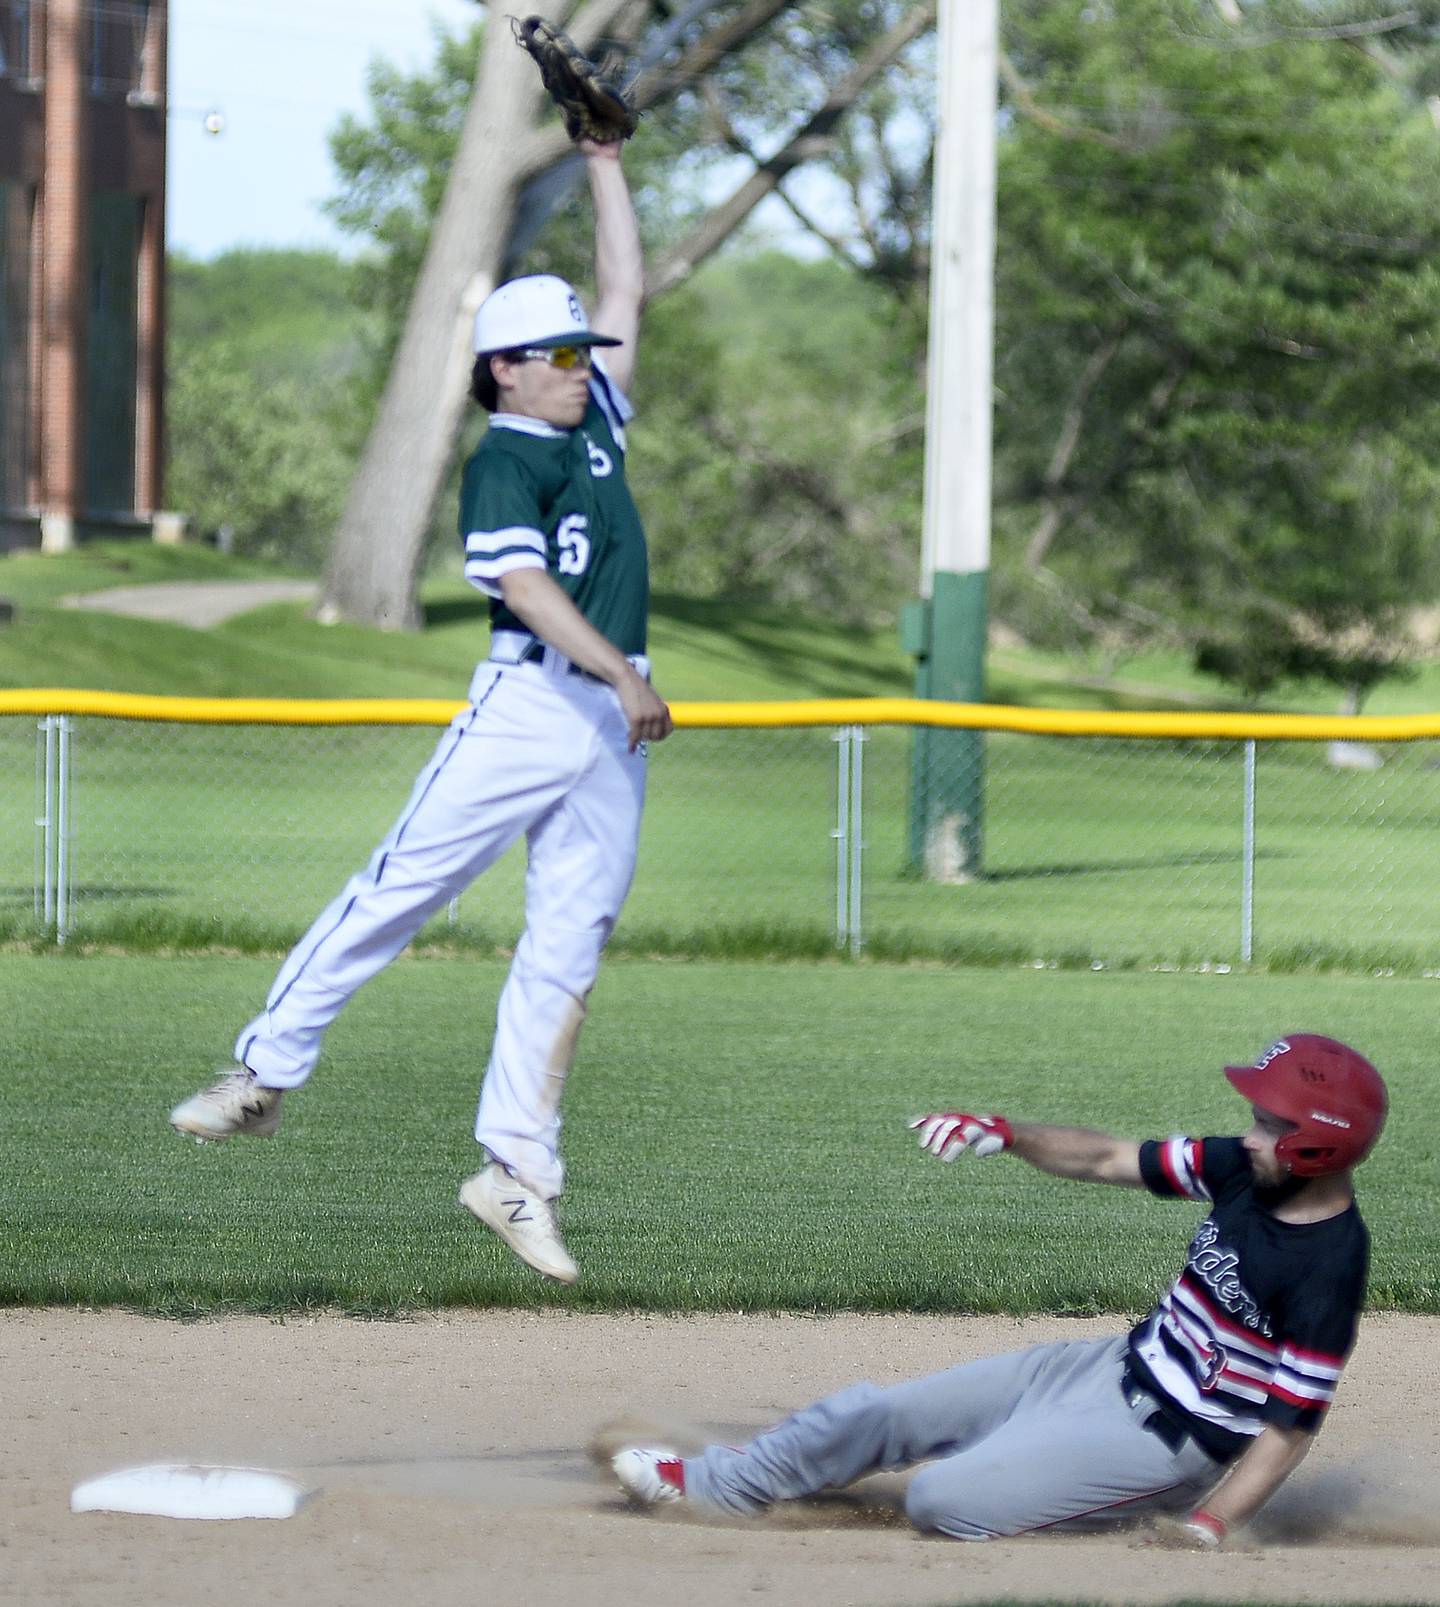 St. Bede second baseman Colin Nave (5) skies for the throw from home while Earlville baserunner slides into second safely Monday, May 16, 2022.